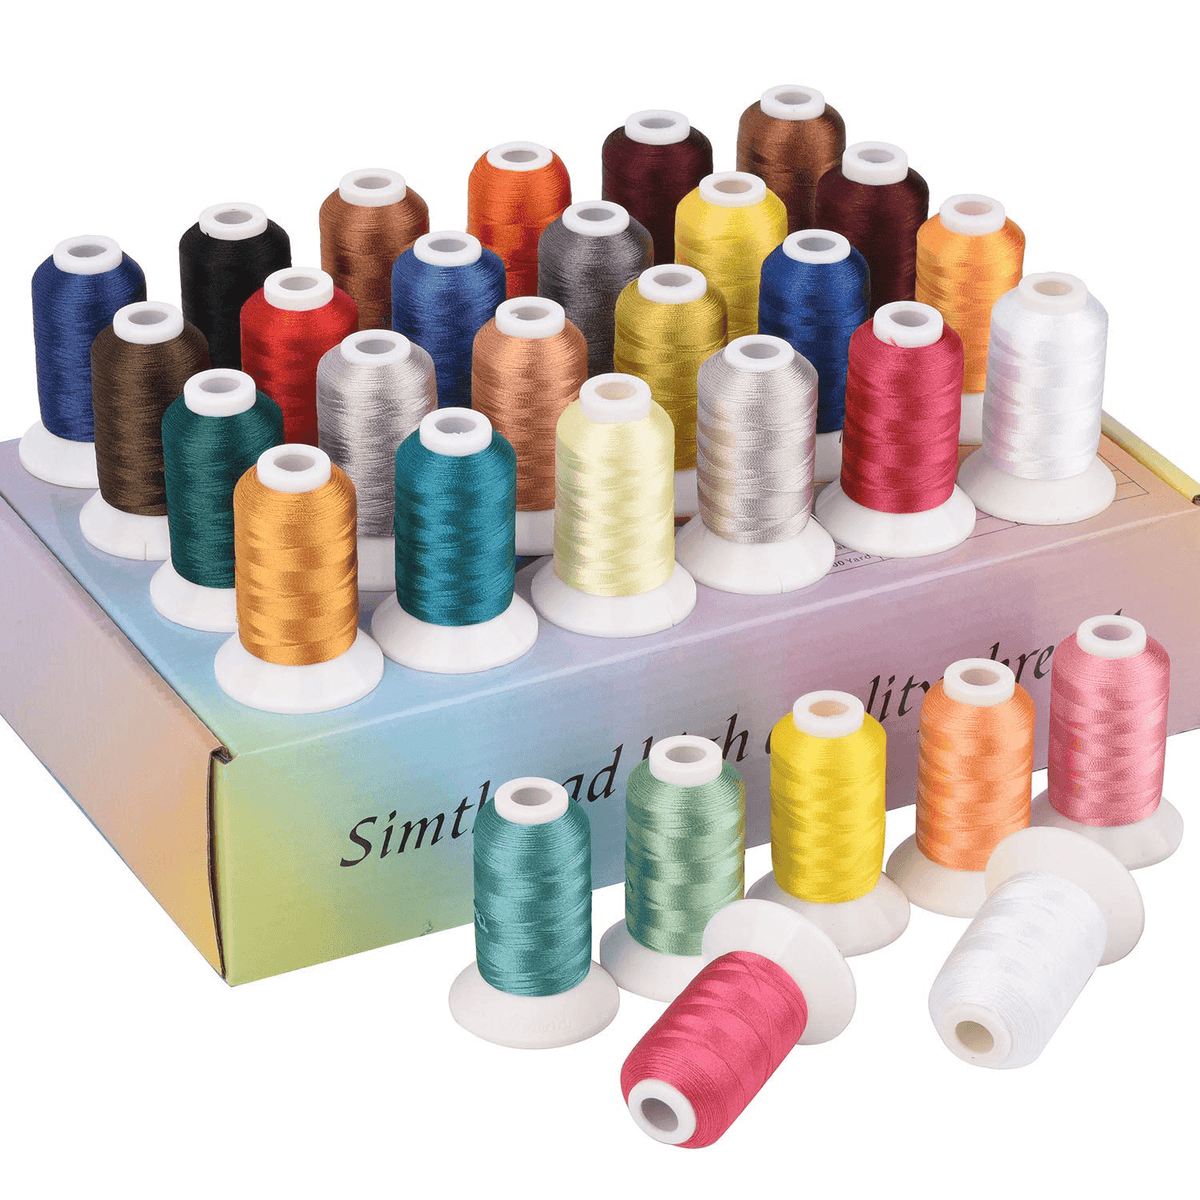 New brothread 40 Brother Colors 500m Each Embroidery Machine Thread with  Clear Plastic Storage Box for Embroidery Sewing Machine 40 Colors